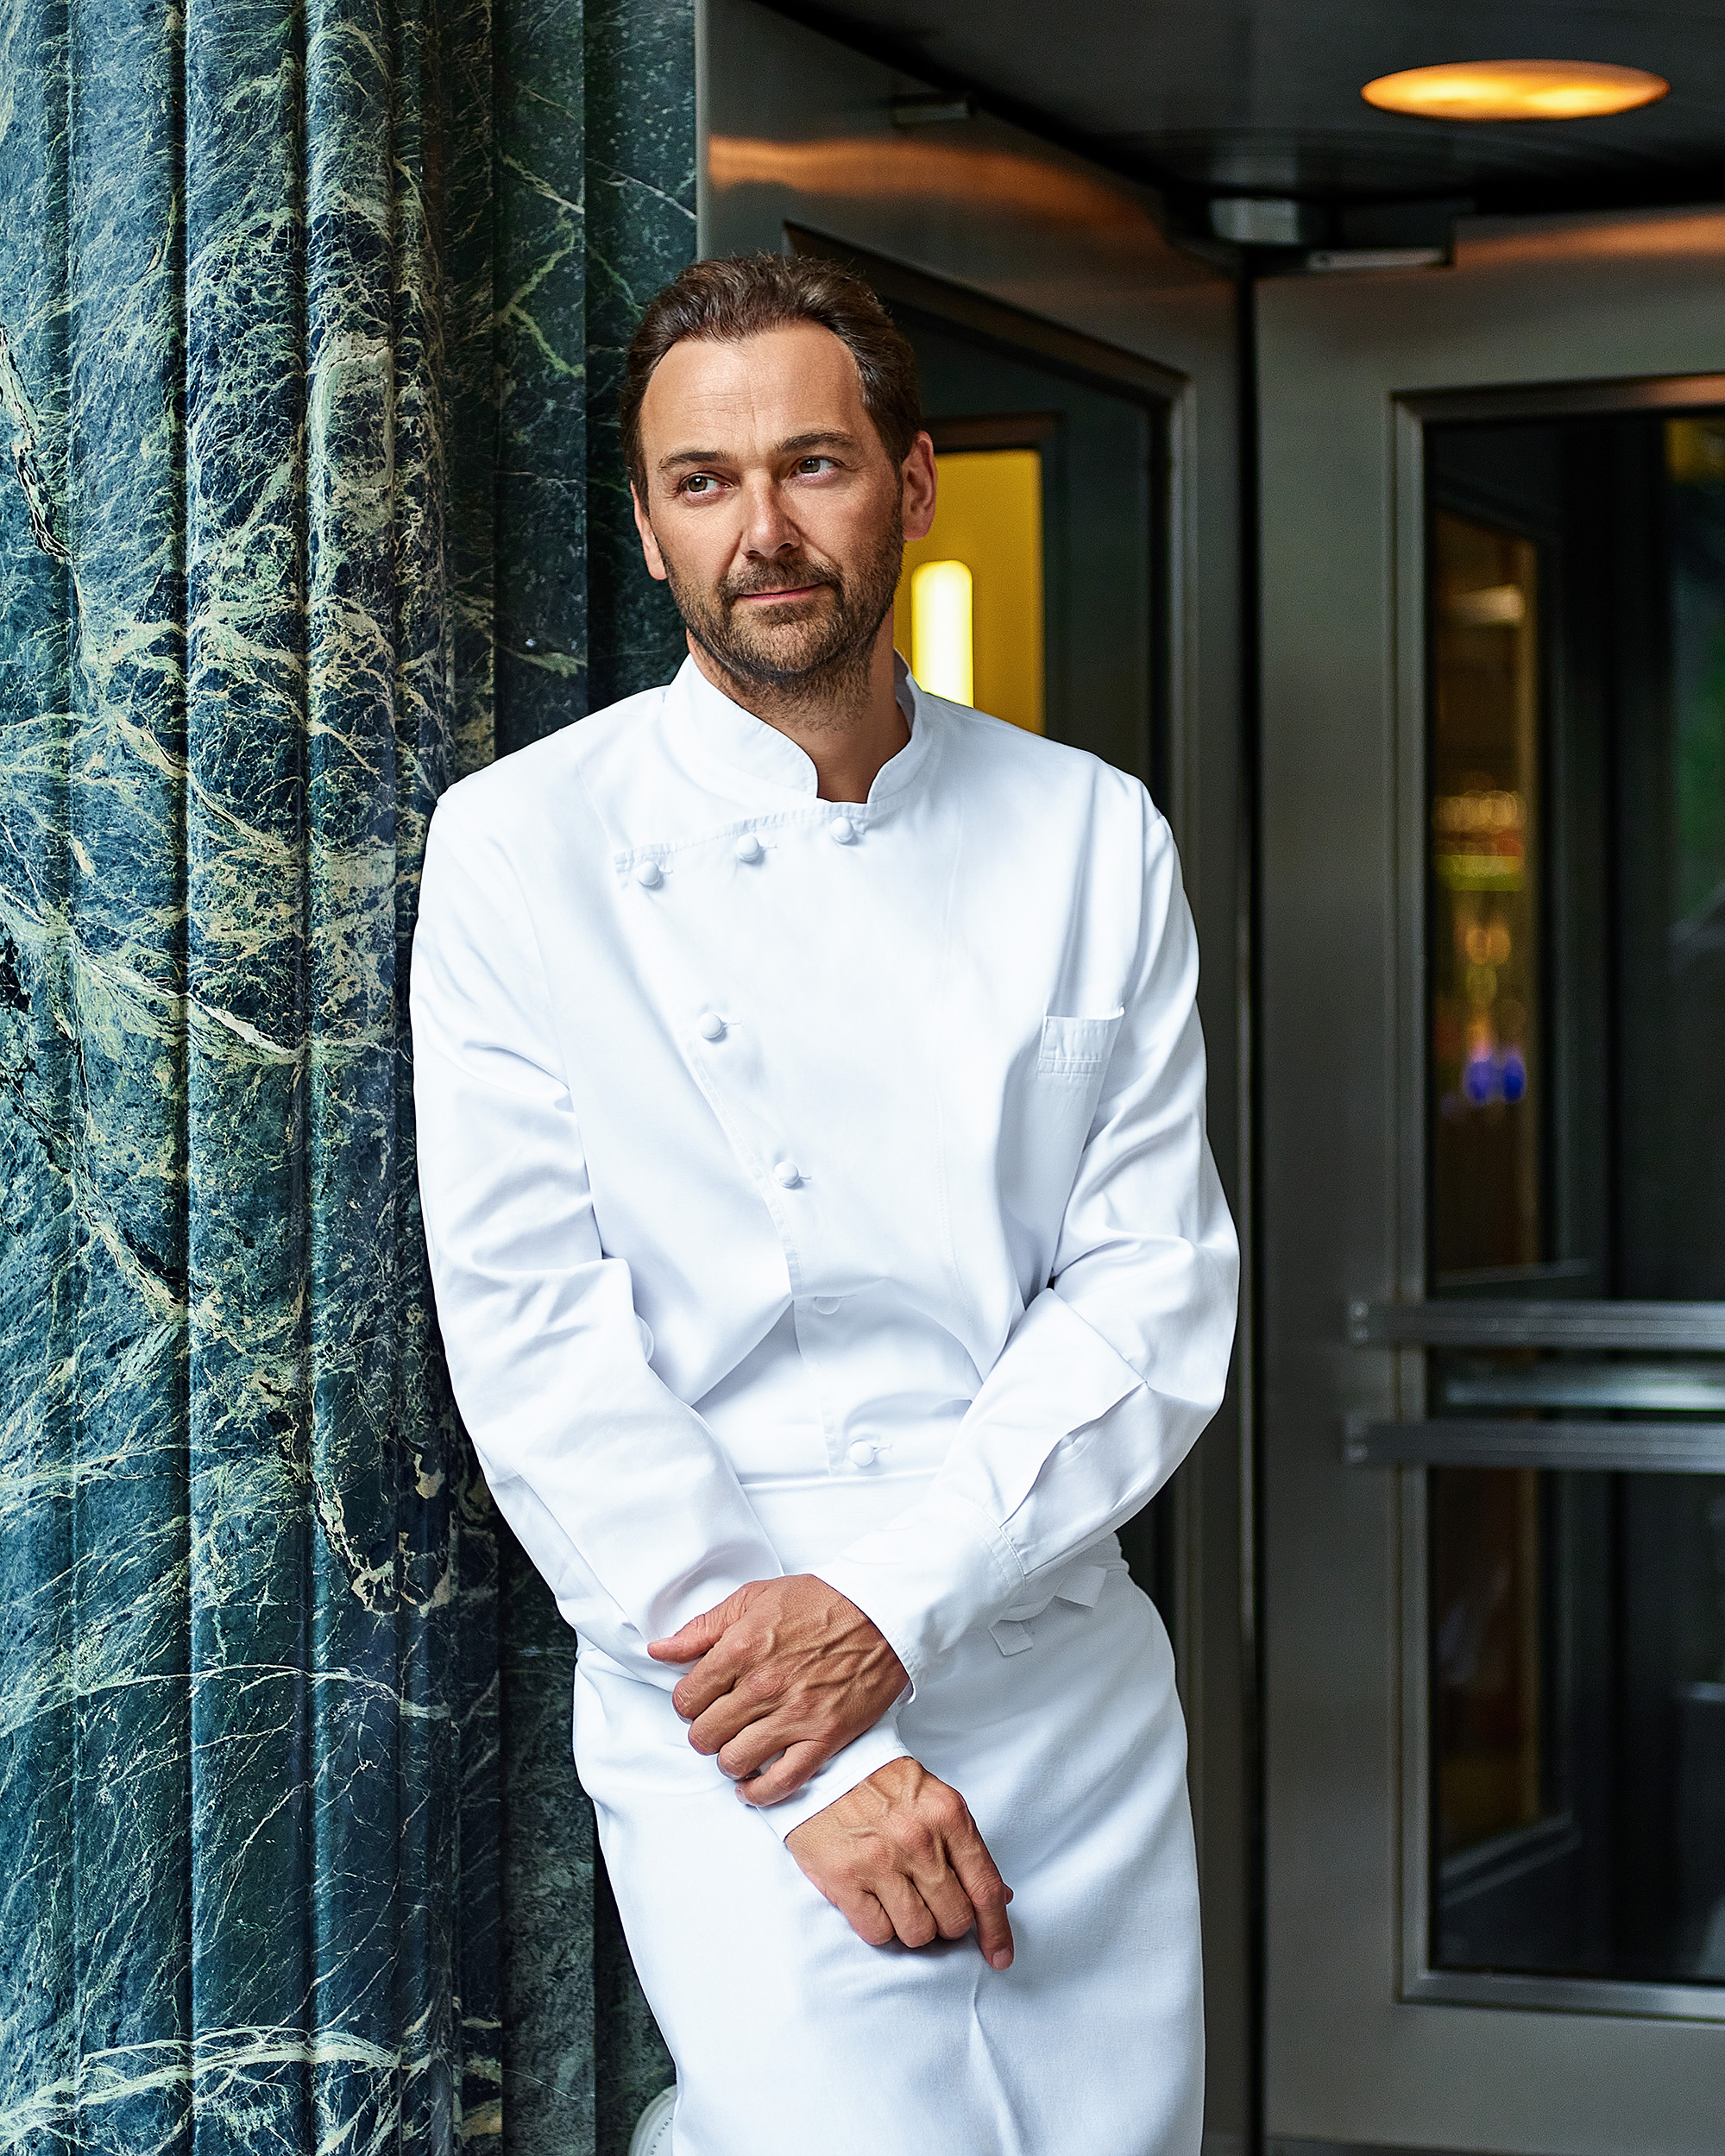 Daniel Humm: “We’re Not Anti-Meat, but We Are Pro-Planet”